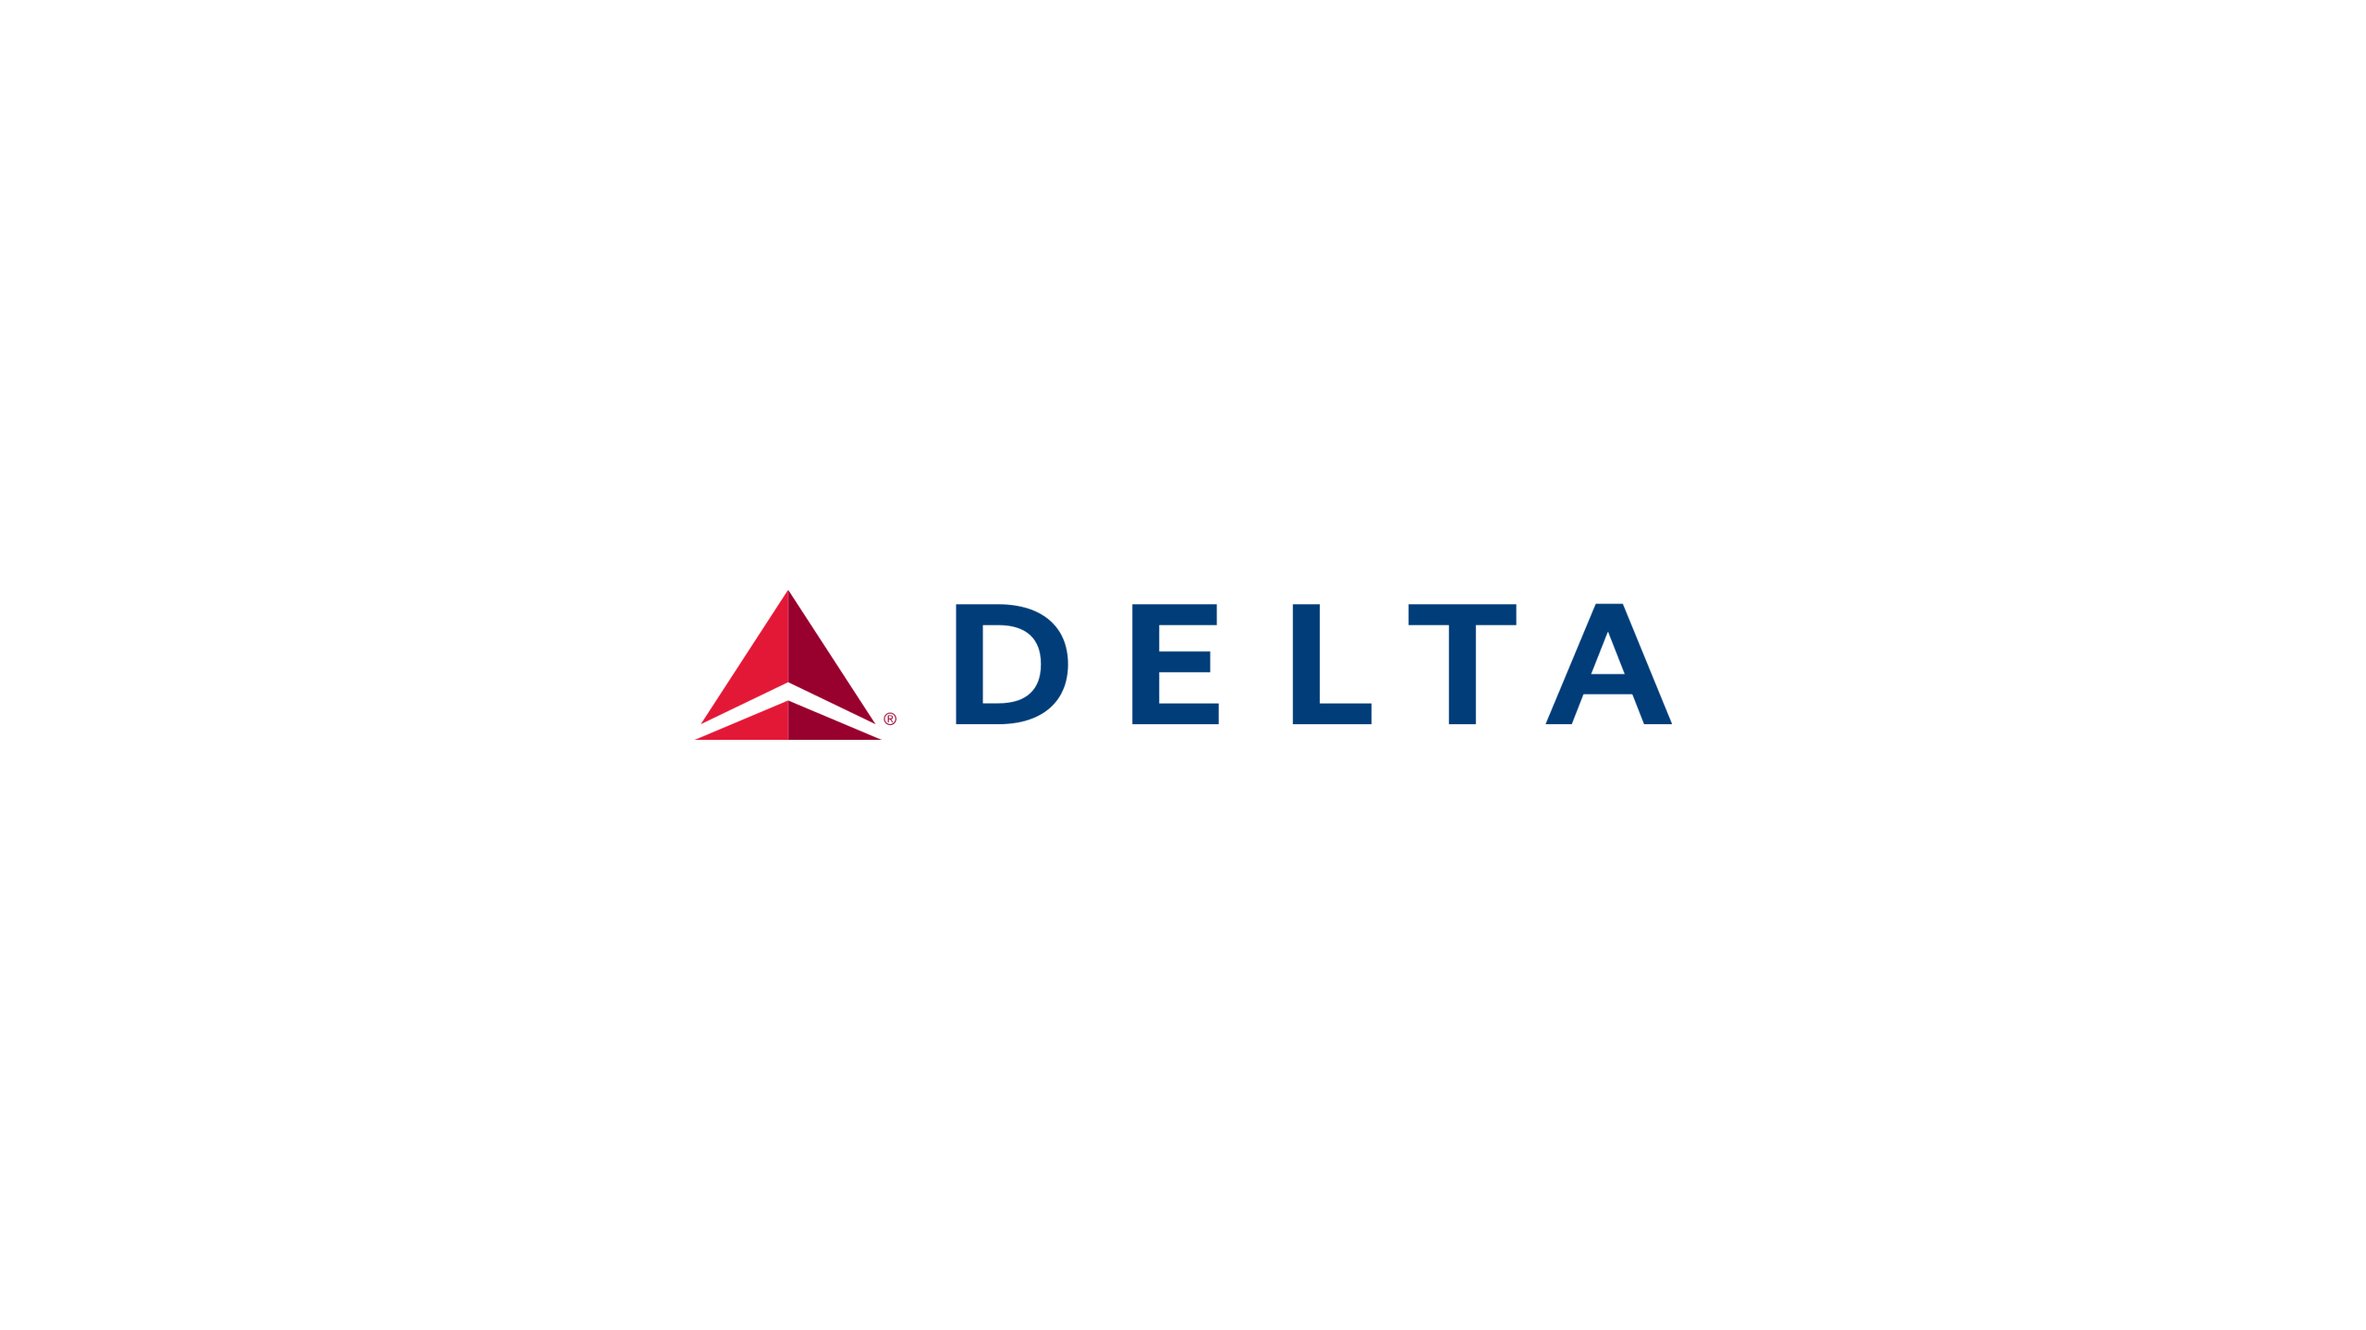 Seeking Male/Female's For Delta One® Suites 2020 TV Commercial!